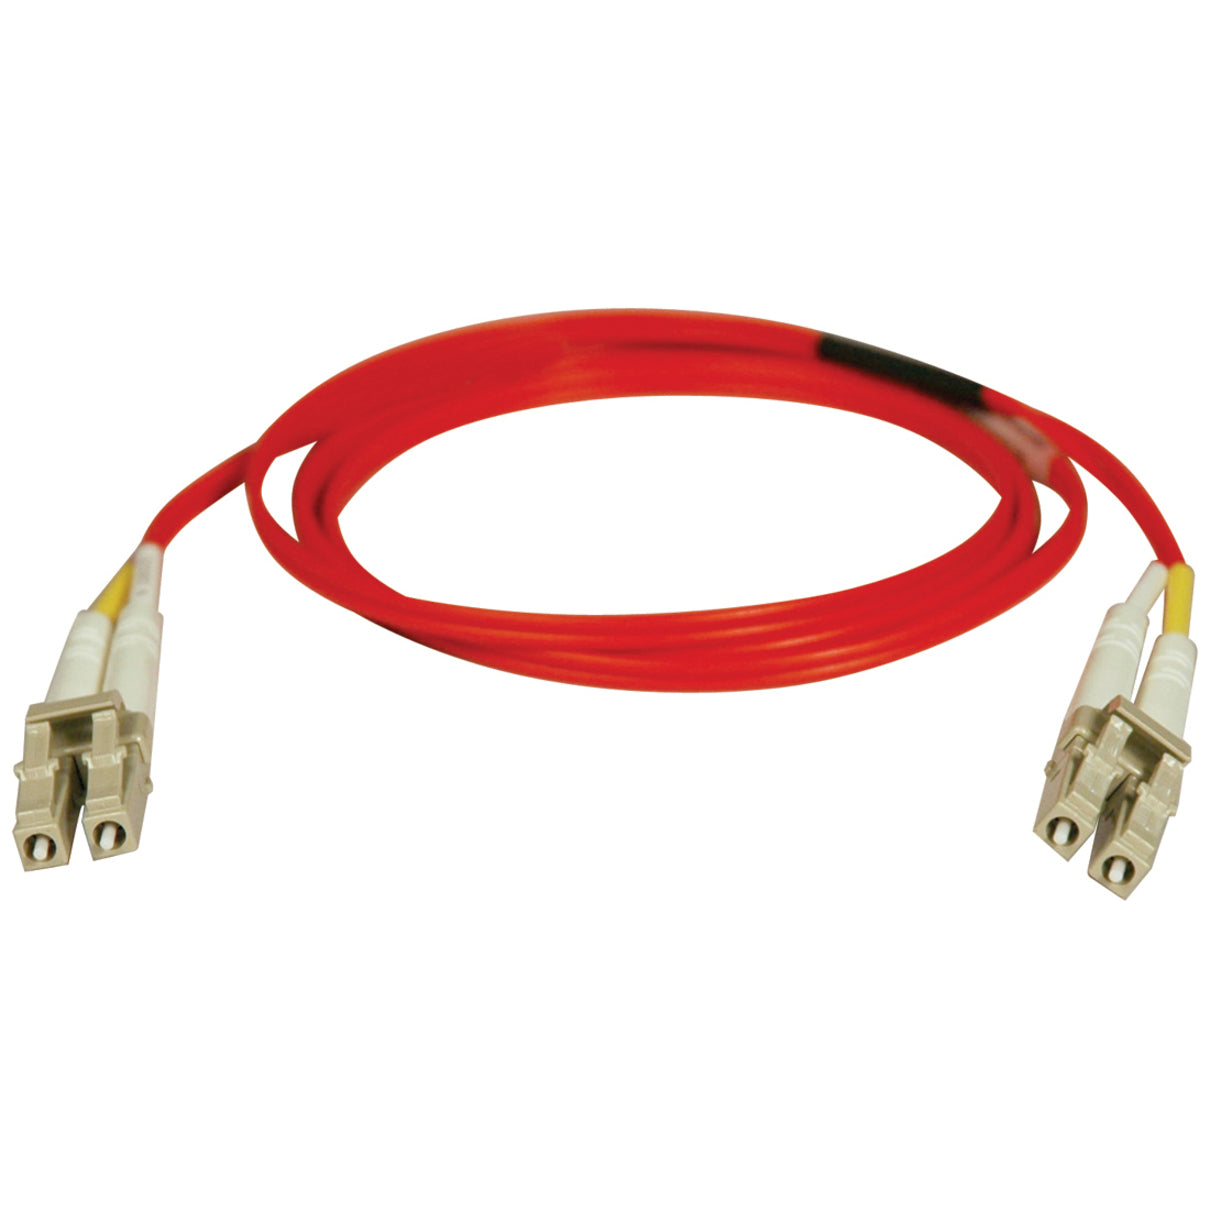 Tripp Lite by Eaton 15M DUPLEX FIBER MULTIMODE LC/LC 62.5/125 PATCH CABLE RED (N320-15M-RD)